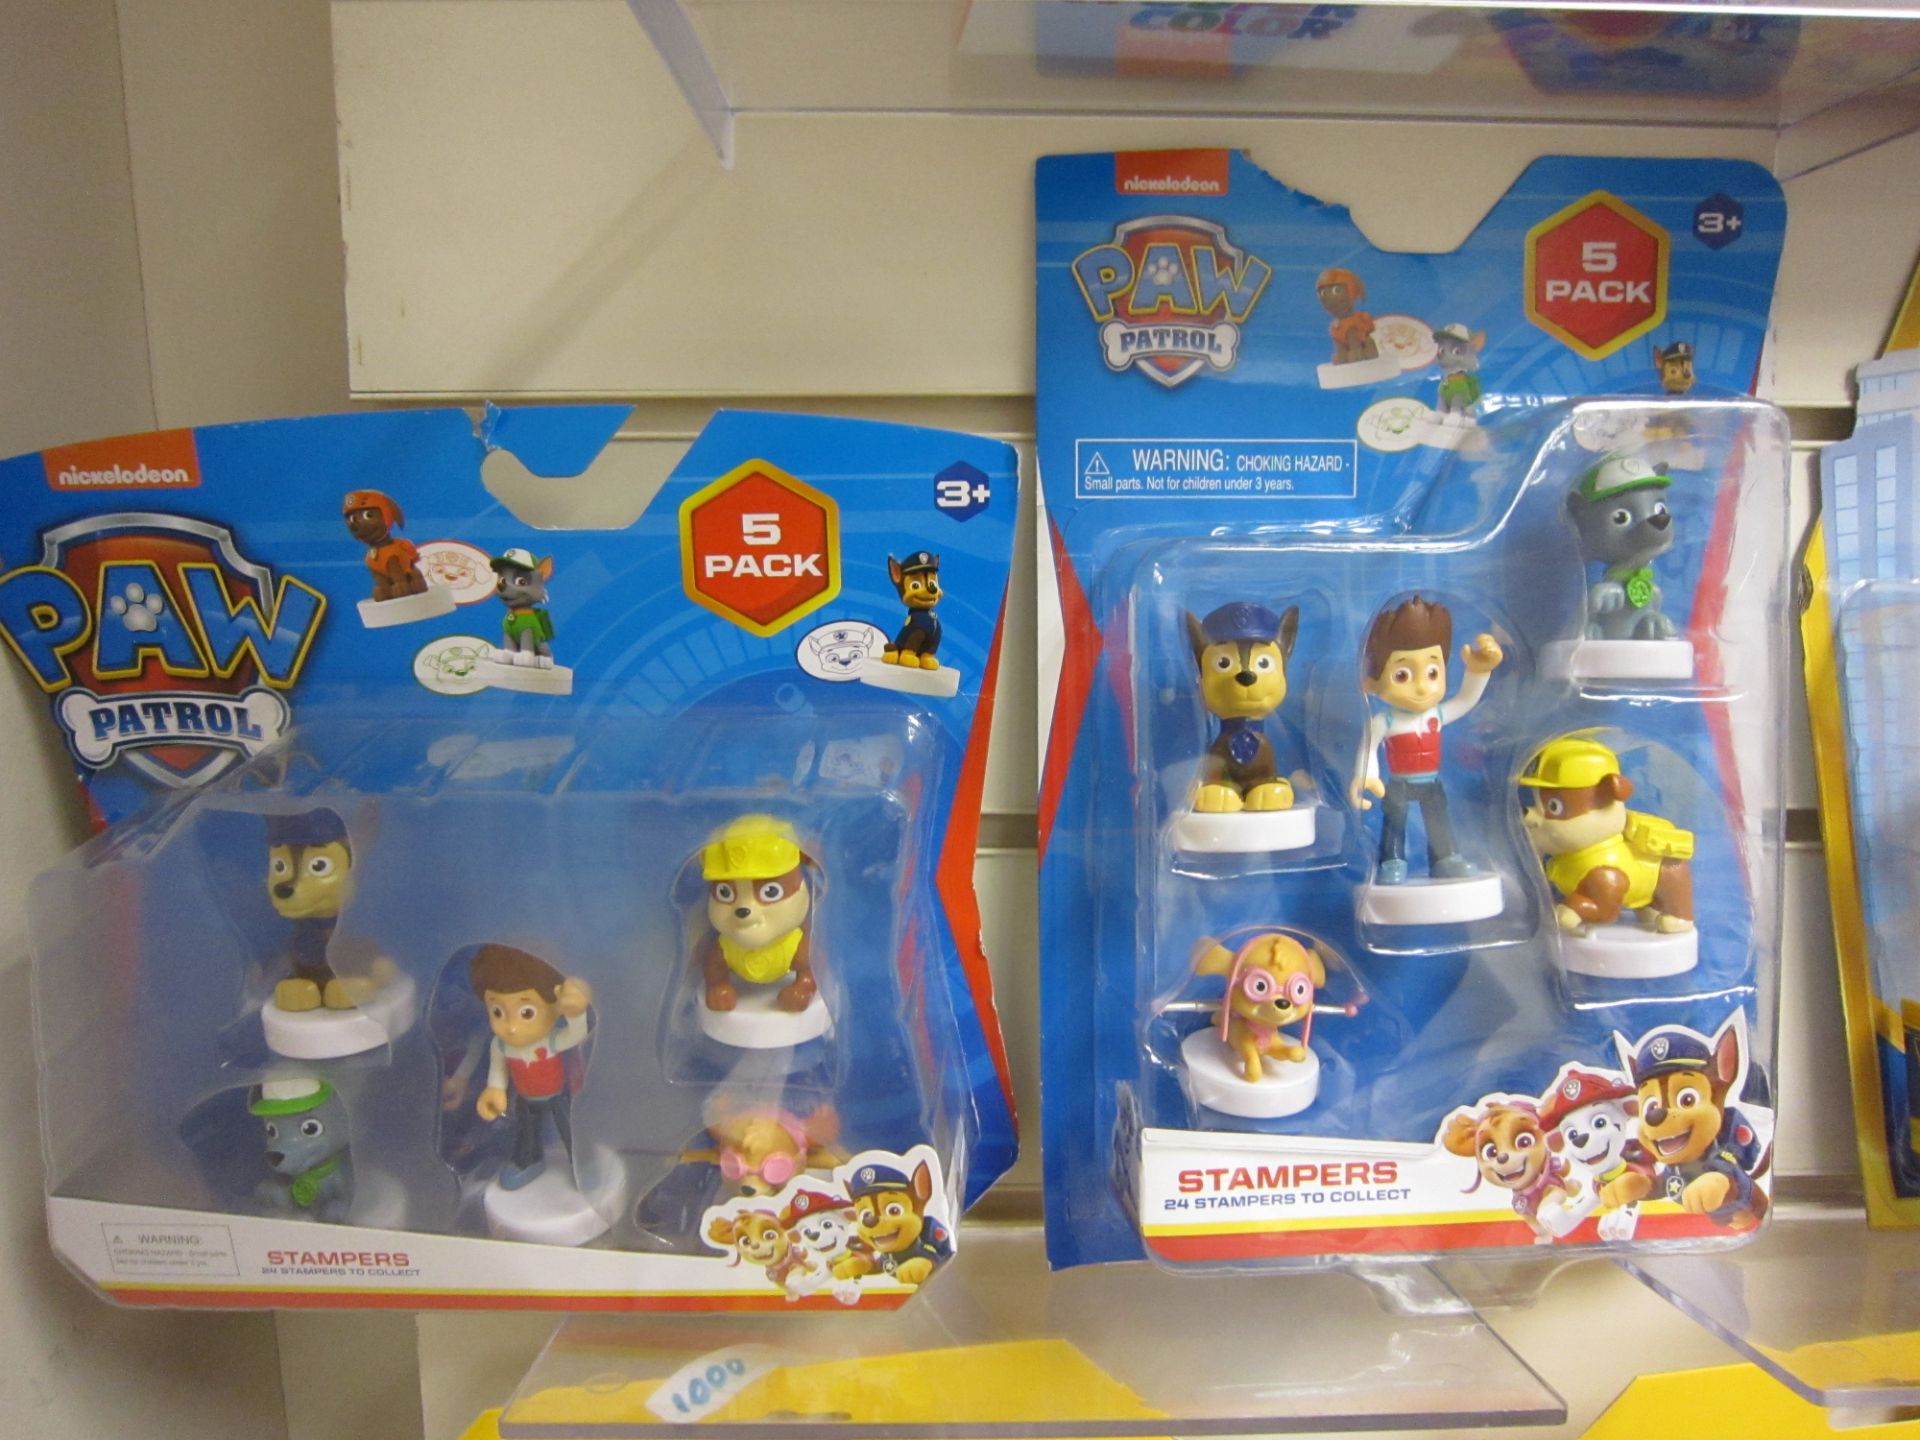 100 Assorted Paw Patrol Stampers / Toppers Sets All Brand New Sealed, Assorted Varieties All Br...